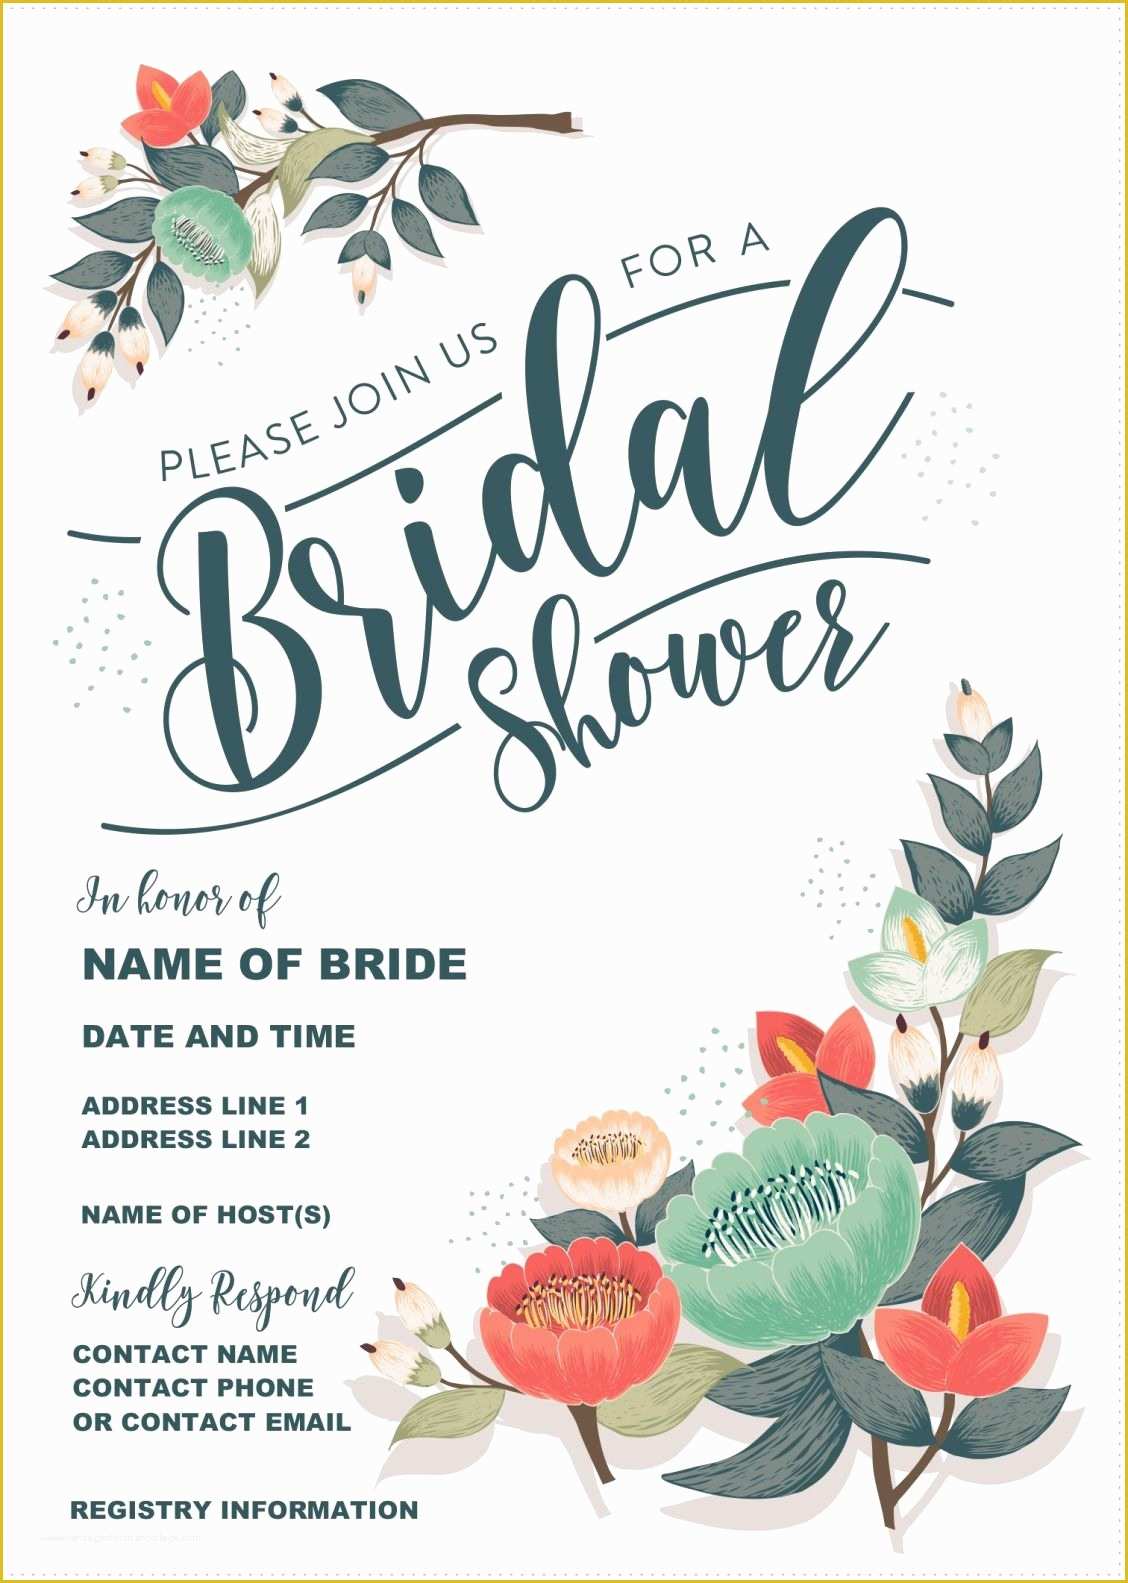 Free Wedding Shower Invitation Templates Of Our Gorgeous Printable Bridal Shower Invitation is totally